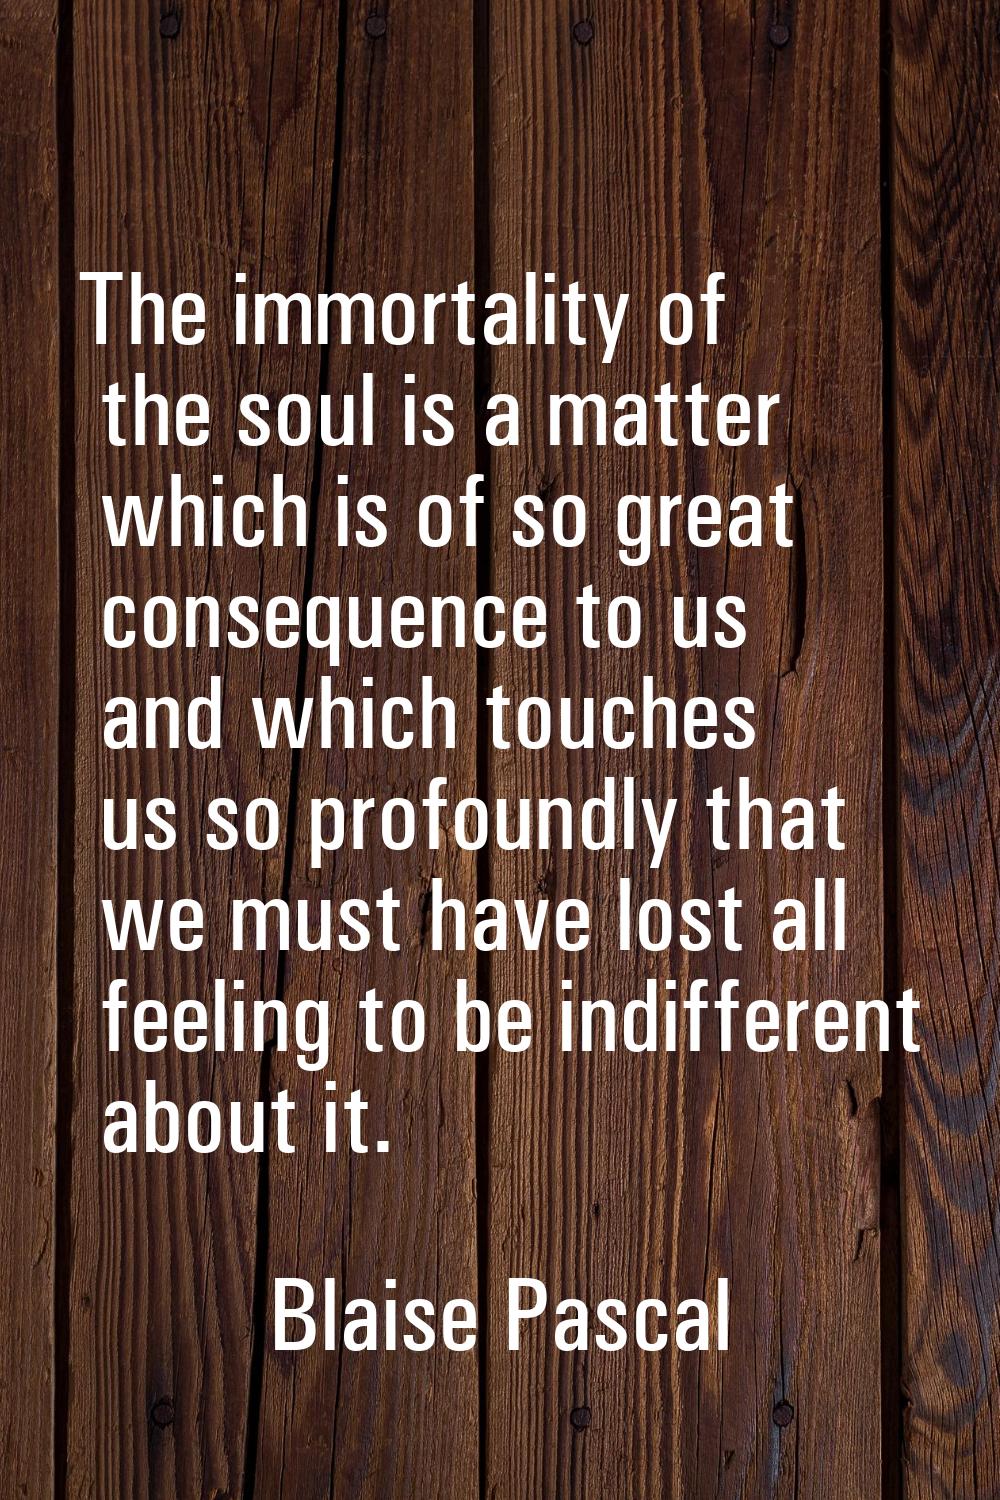 The immortality of the soul is a matter which is of so great consequence to us and which touches us